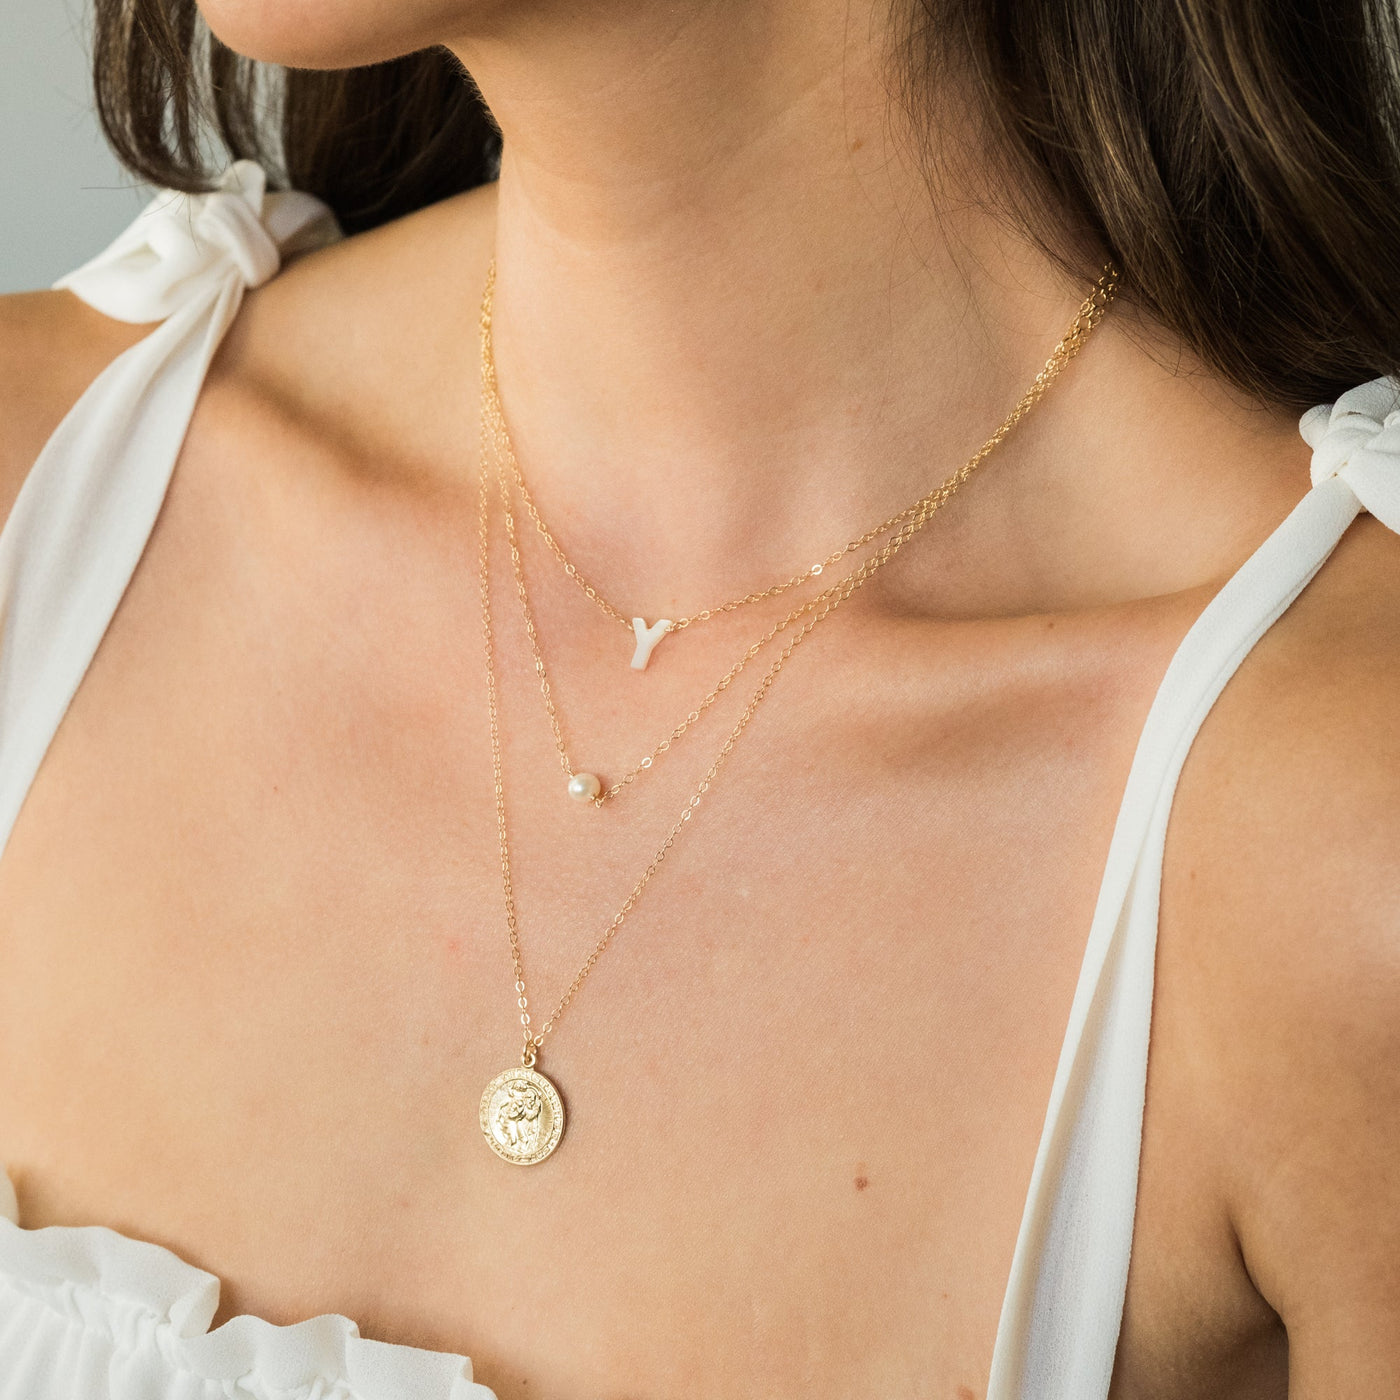 A B C D E F G H I J K L M N O P Q R S T U V W X Y Z Pearl Initial Necklace